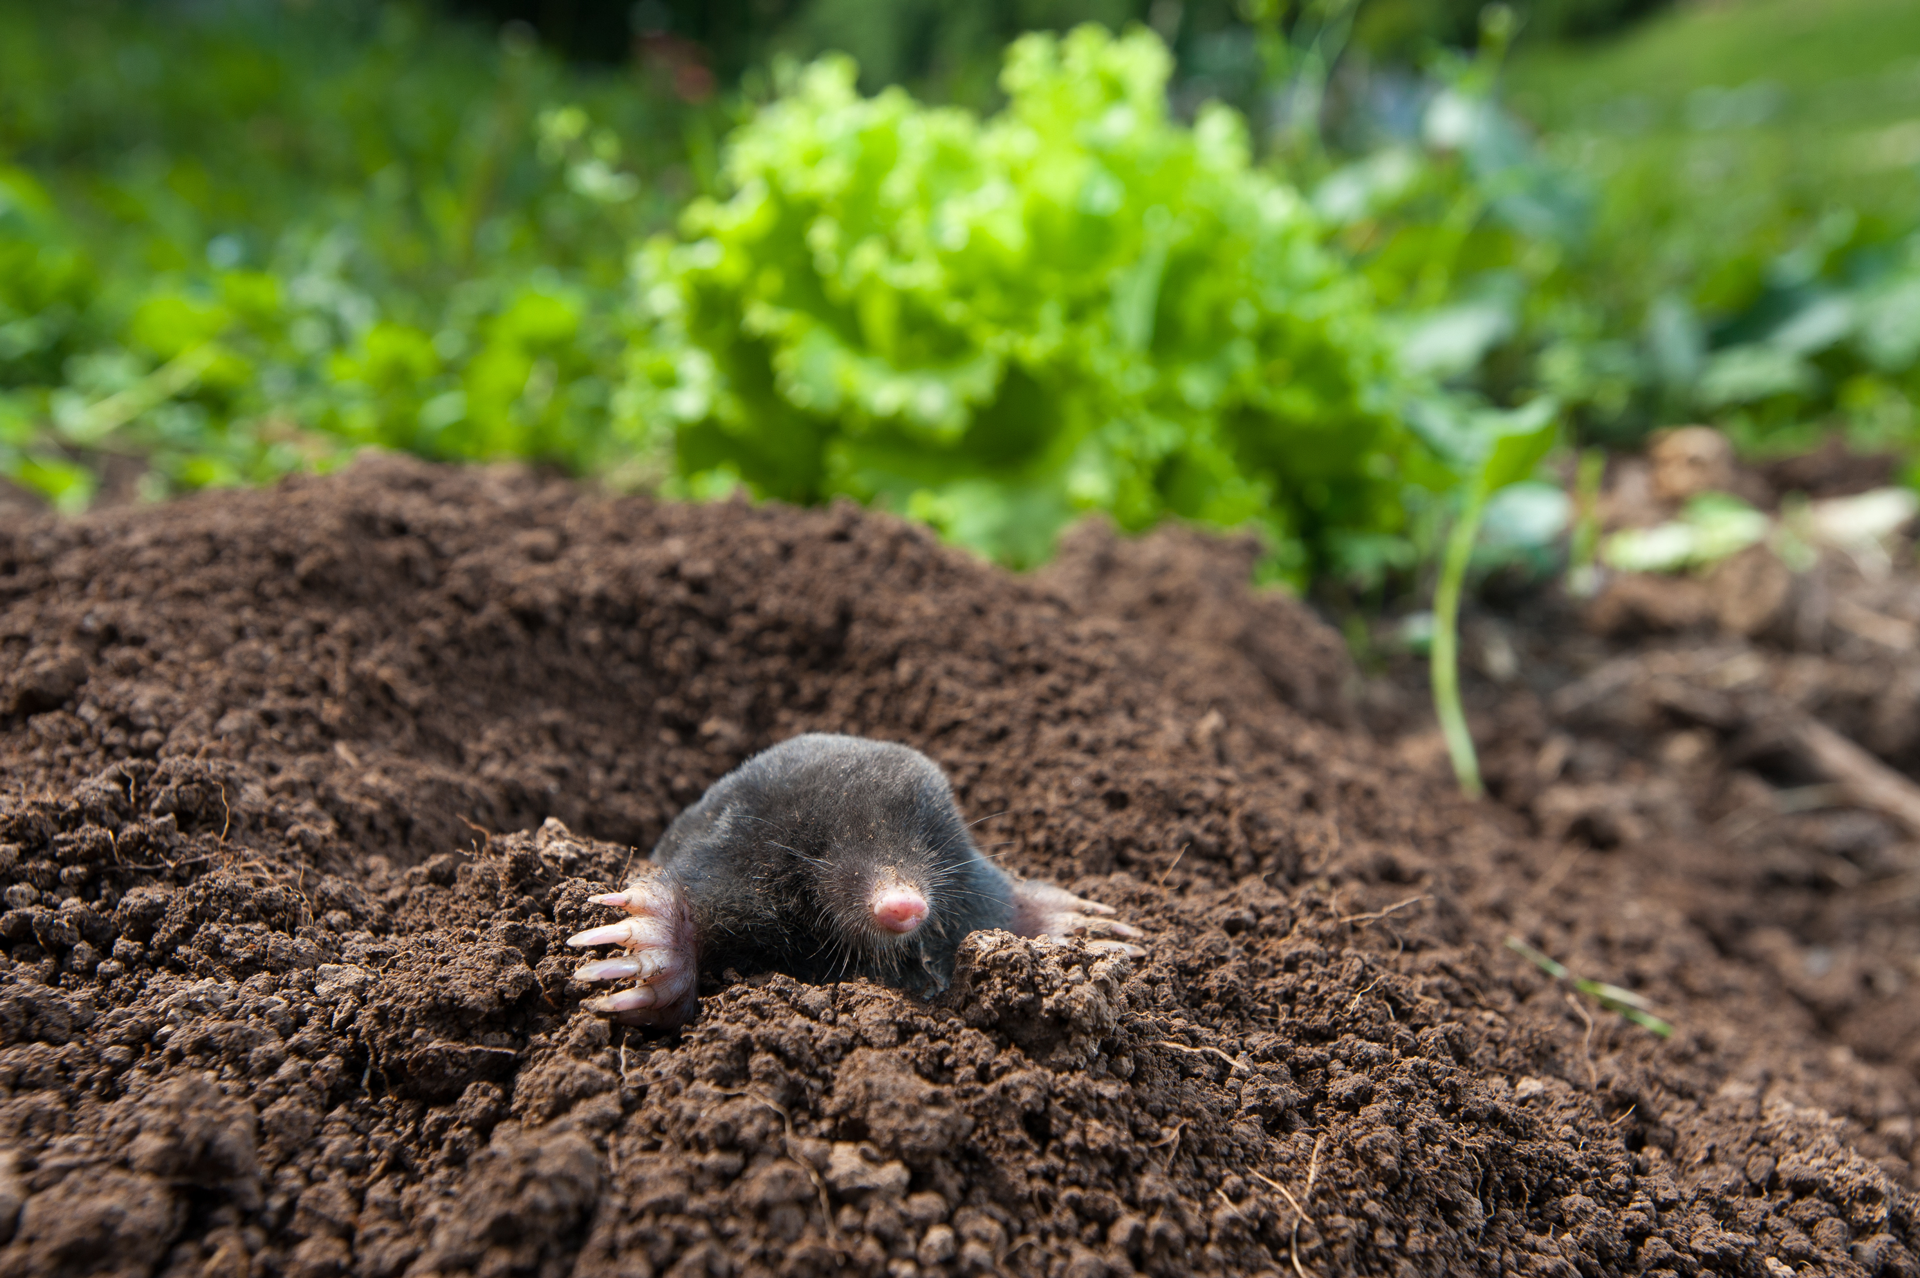 a mole is sticking its head out of a hole in the ground .